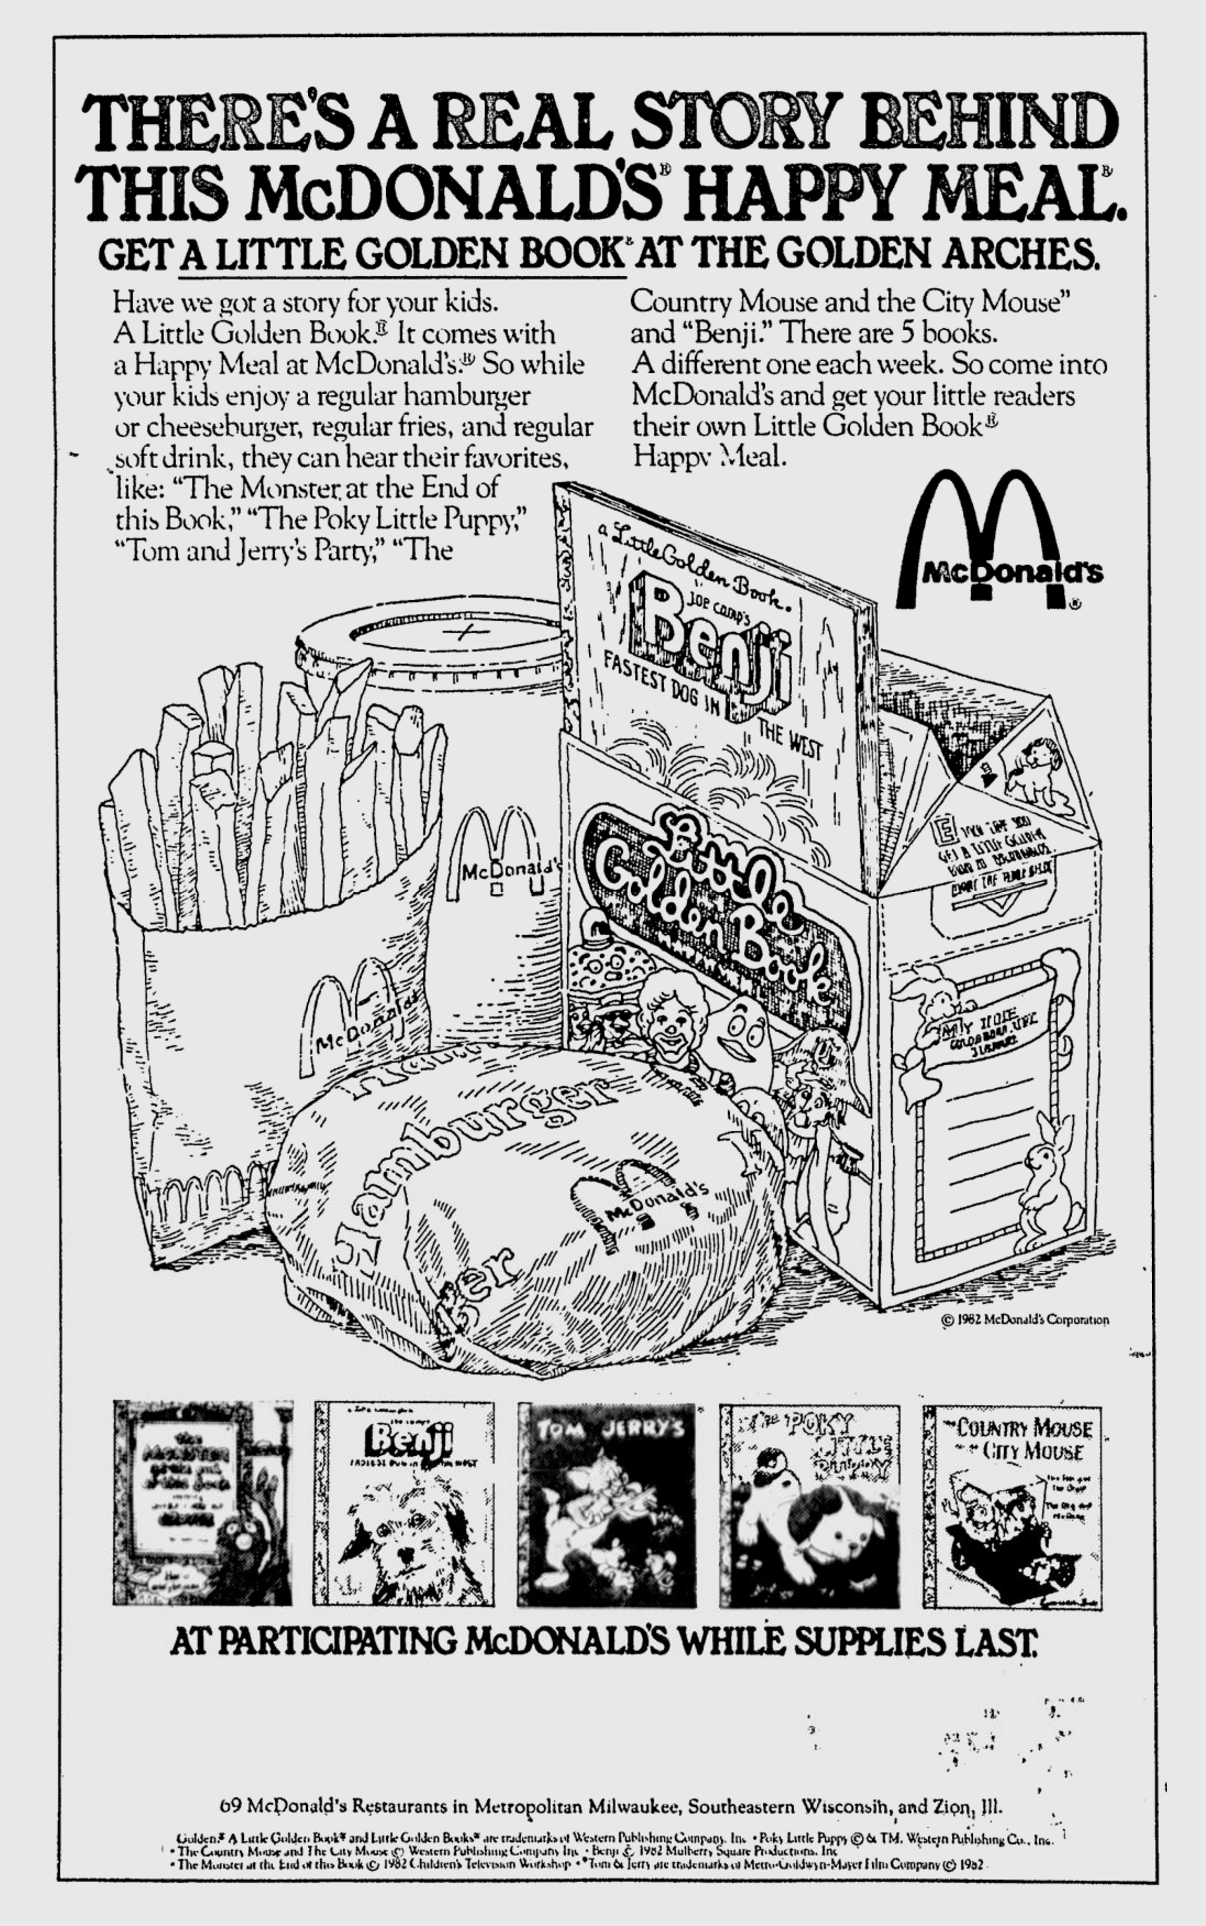 1982 McDonalds Happy Meal Box - LITTLE GOLDEN BOOK New Old Stock Never Used